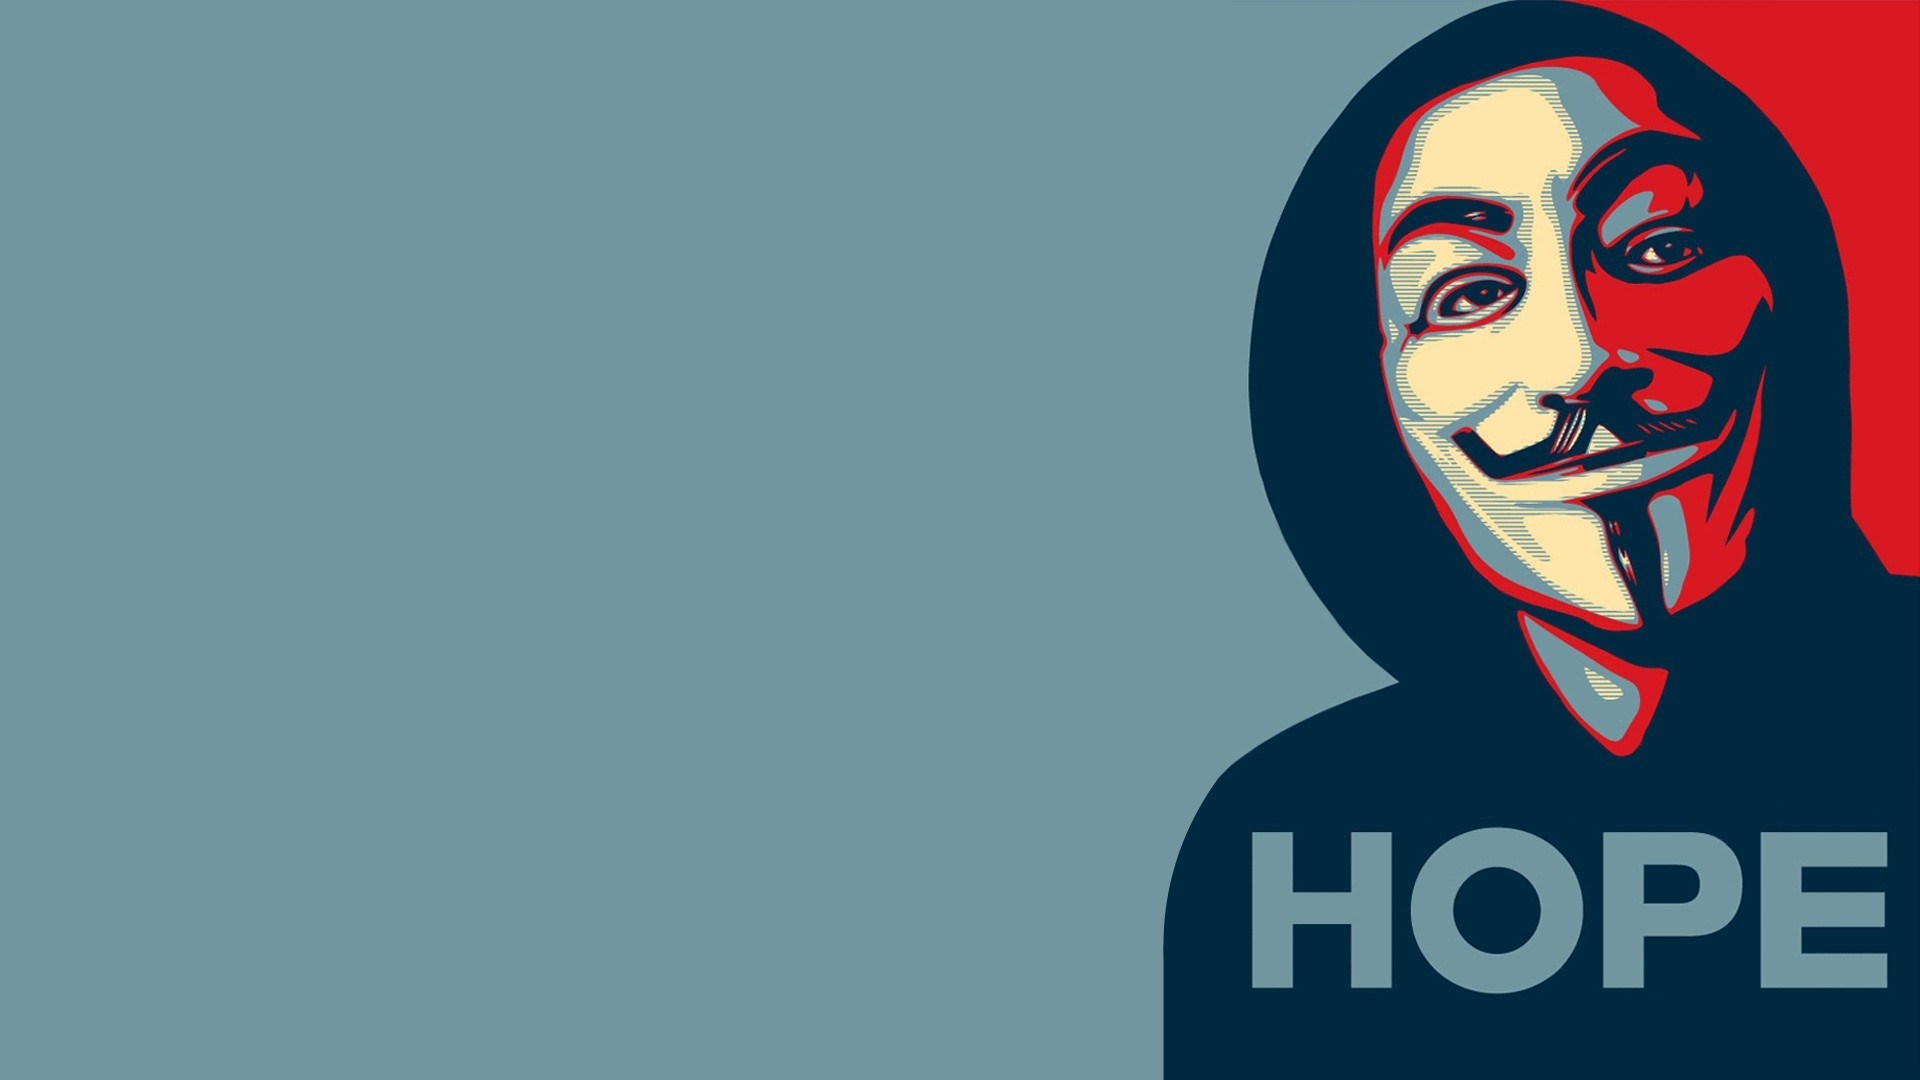 General 1920x1080 Anonymous (hacker group) Hope posters Guy Fawkes mask typography